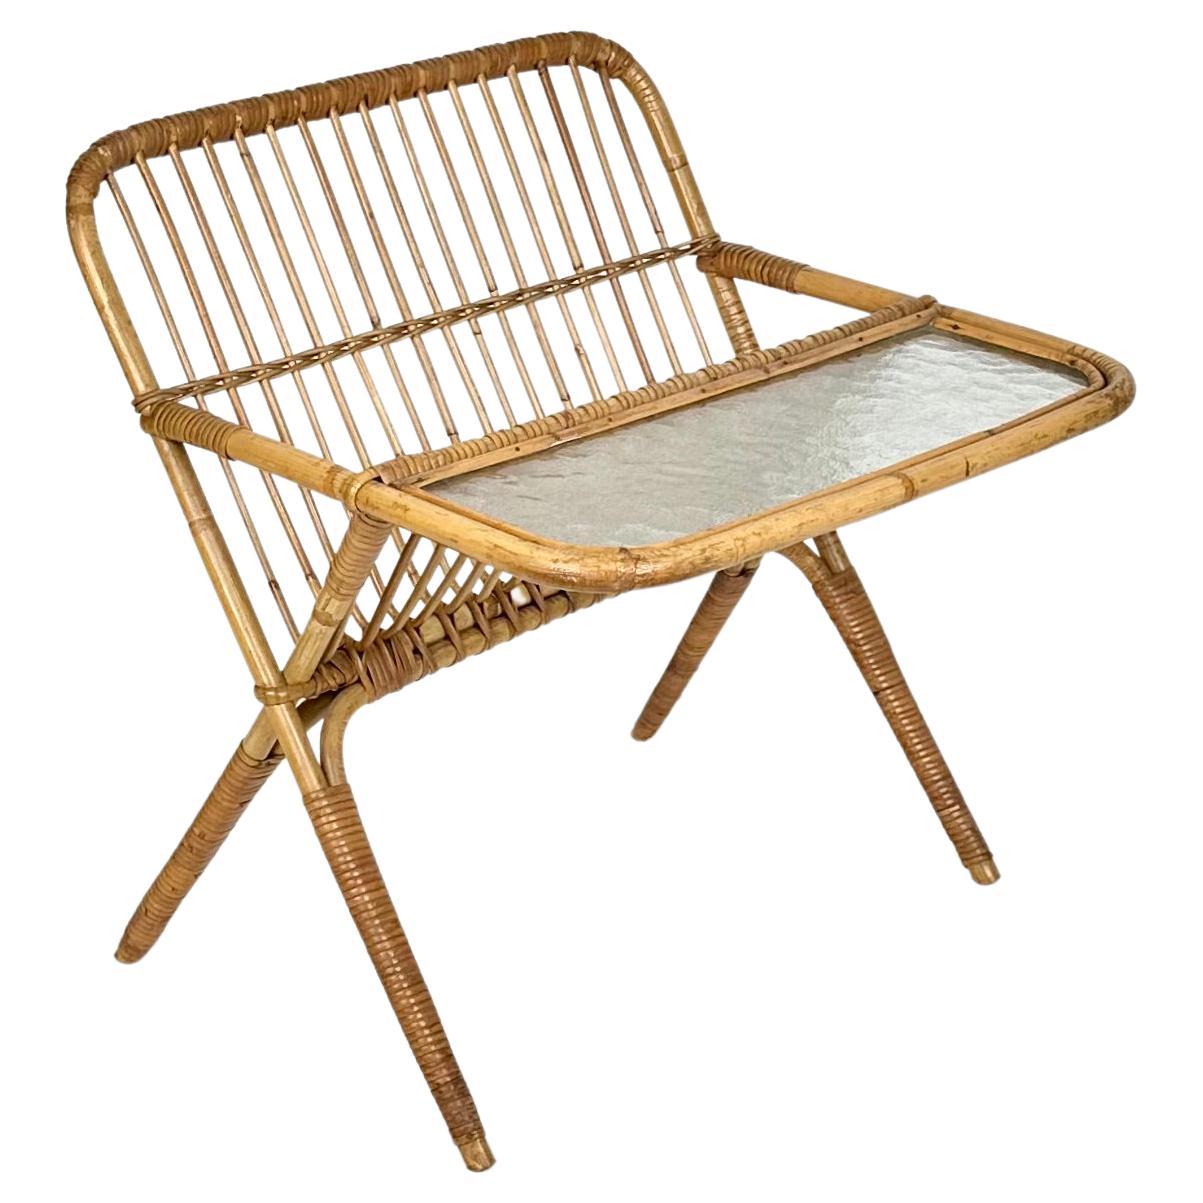 Midcentury Bamboo and Rattan Magazine Rack Table with Glass Shelf, Italy 1960s